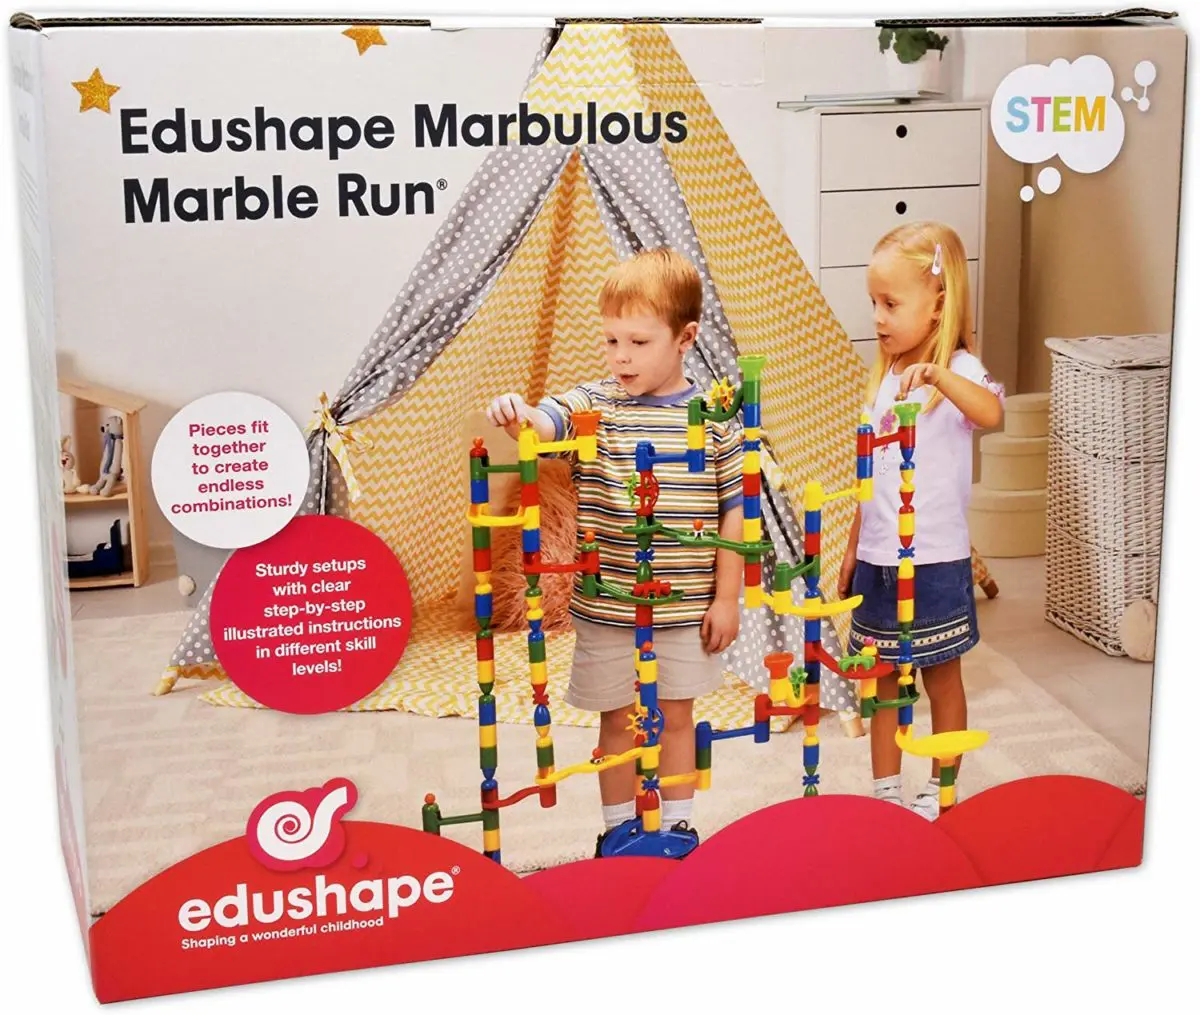 Edushape Marbulous Marble Run Track Set - Top Toys and Gifts for Five Year Old Boys 2